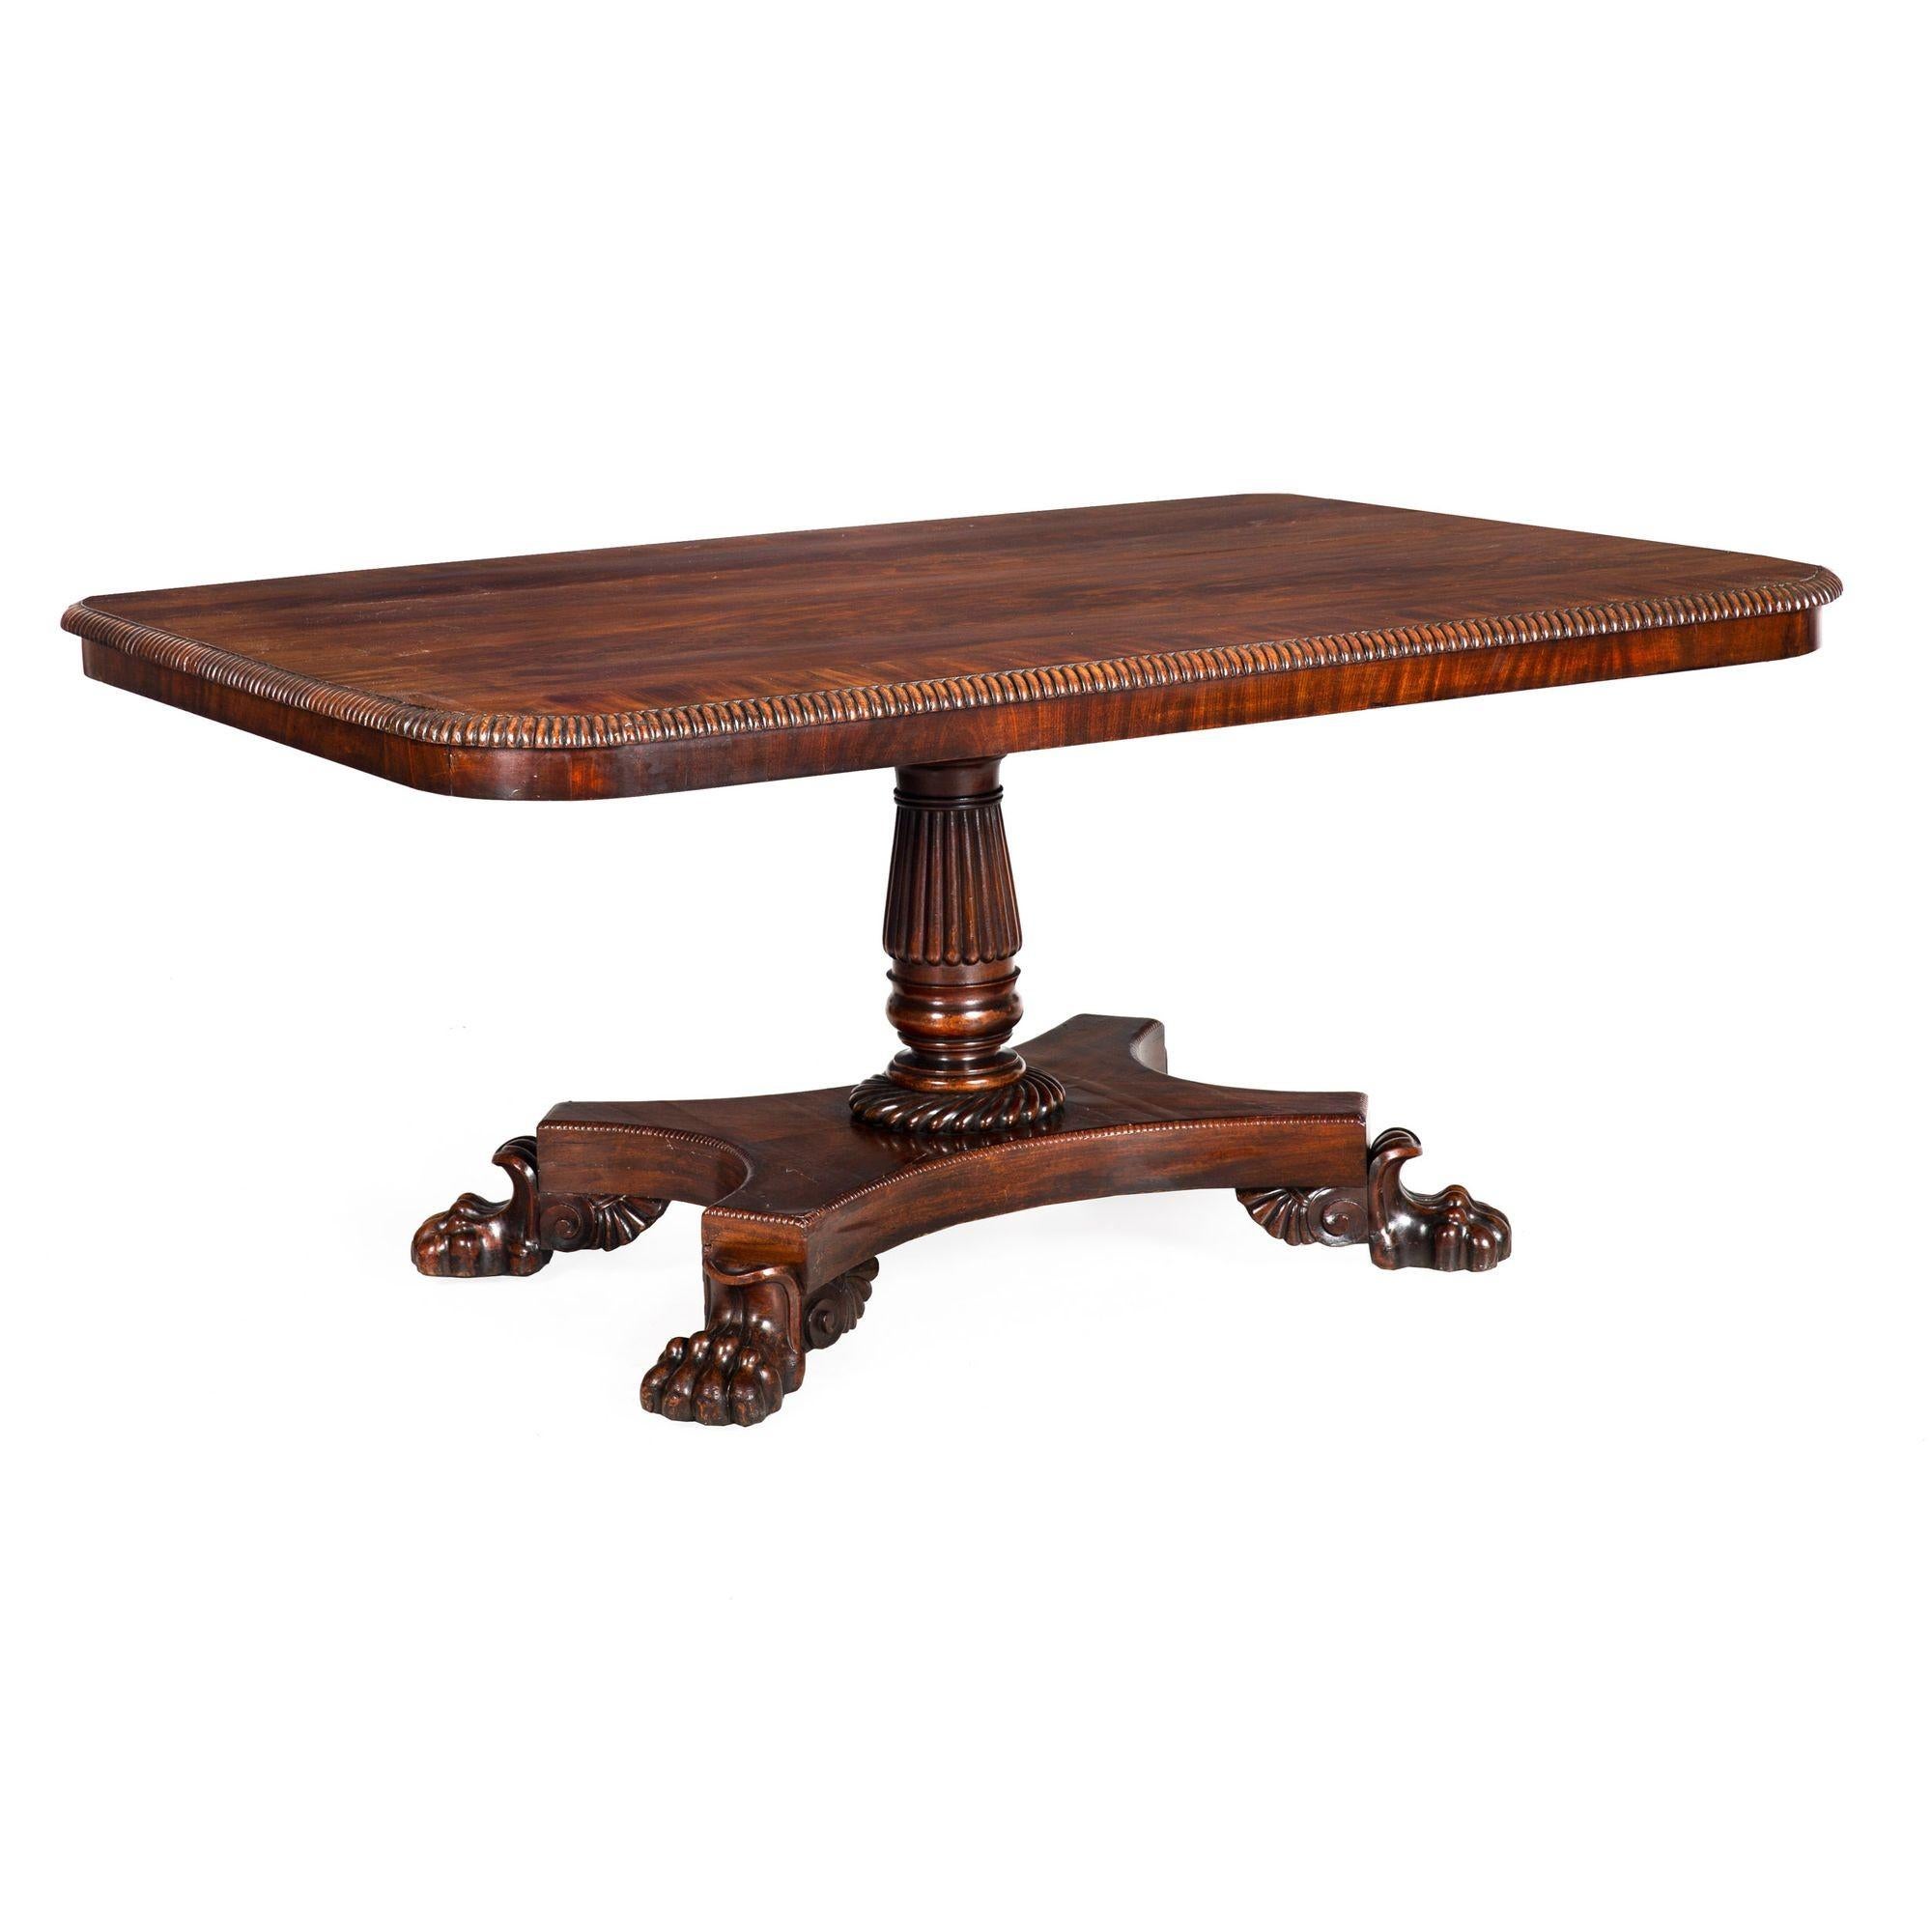 Circa 1840 English William IV Flame Mahogany Tilting Breakfast Table In Good Condition For Sale In Shippensburg, PA